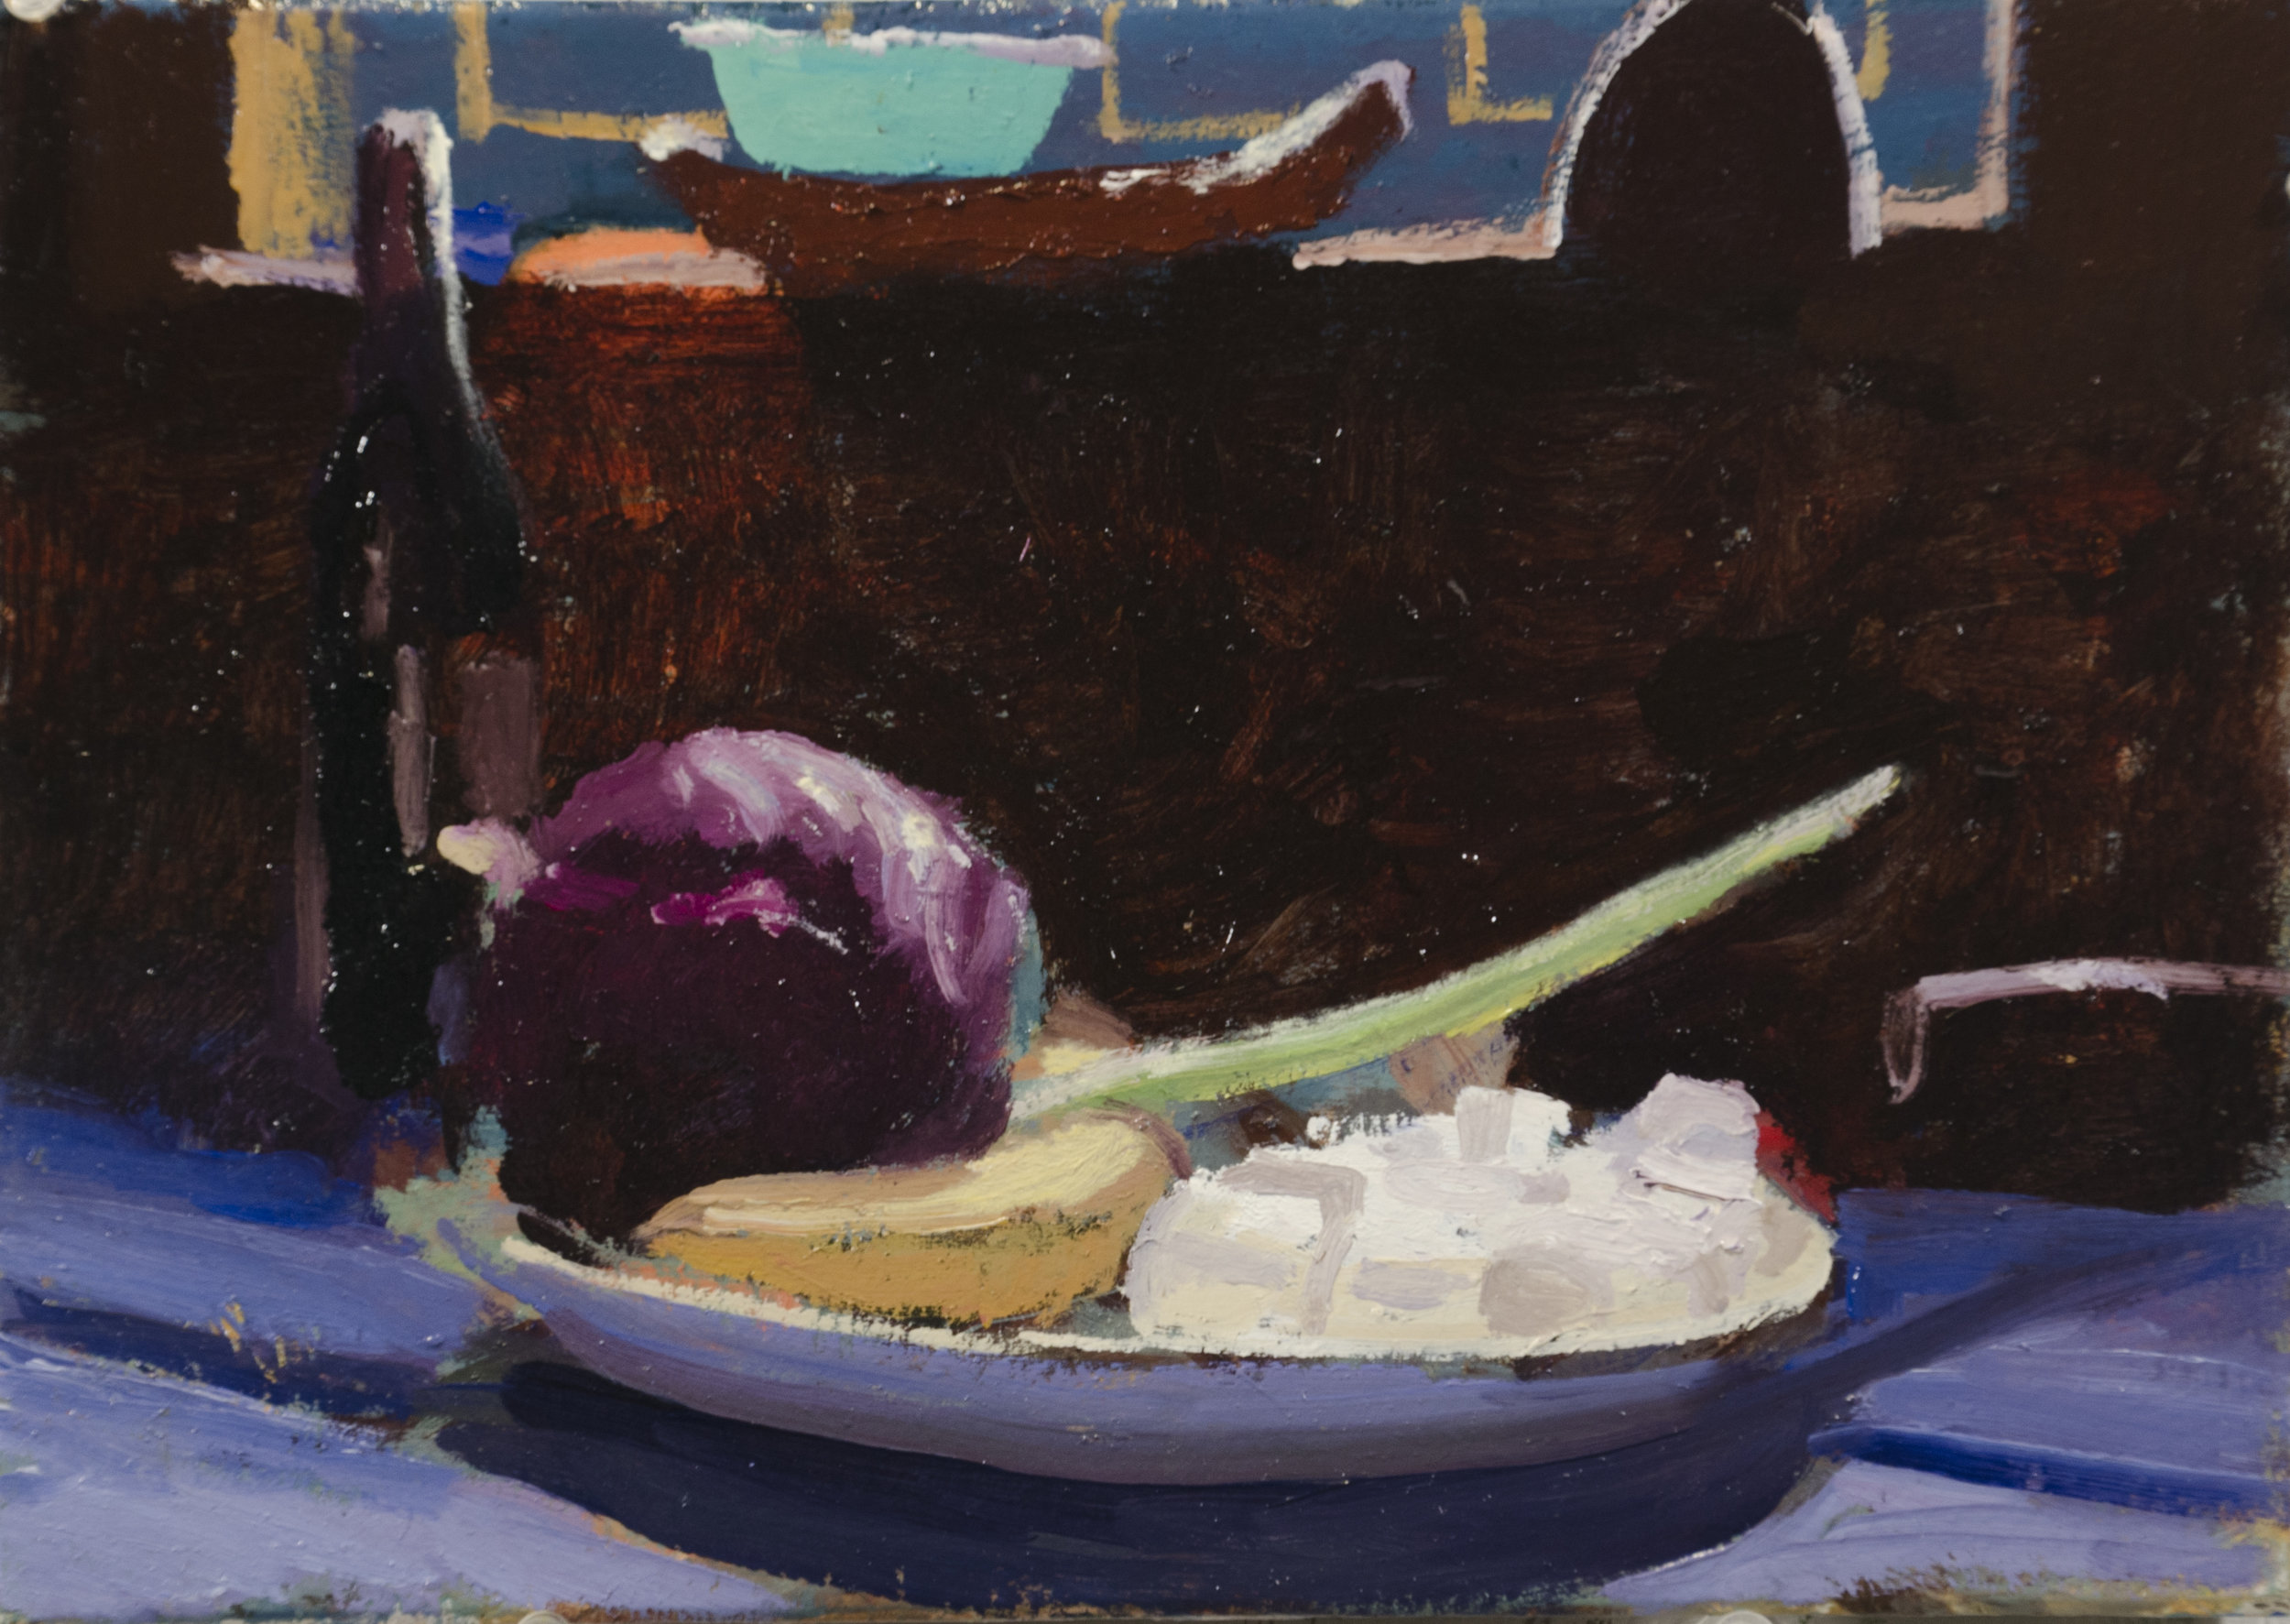 Still Life with Cabbage, Banana, Marshmallows, and Garlic, 7 x 10", Oil on board, 2016